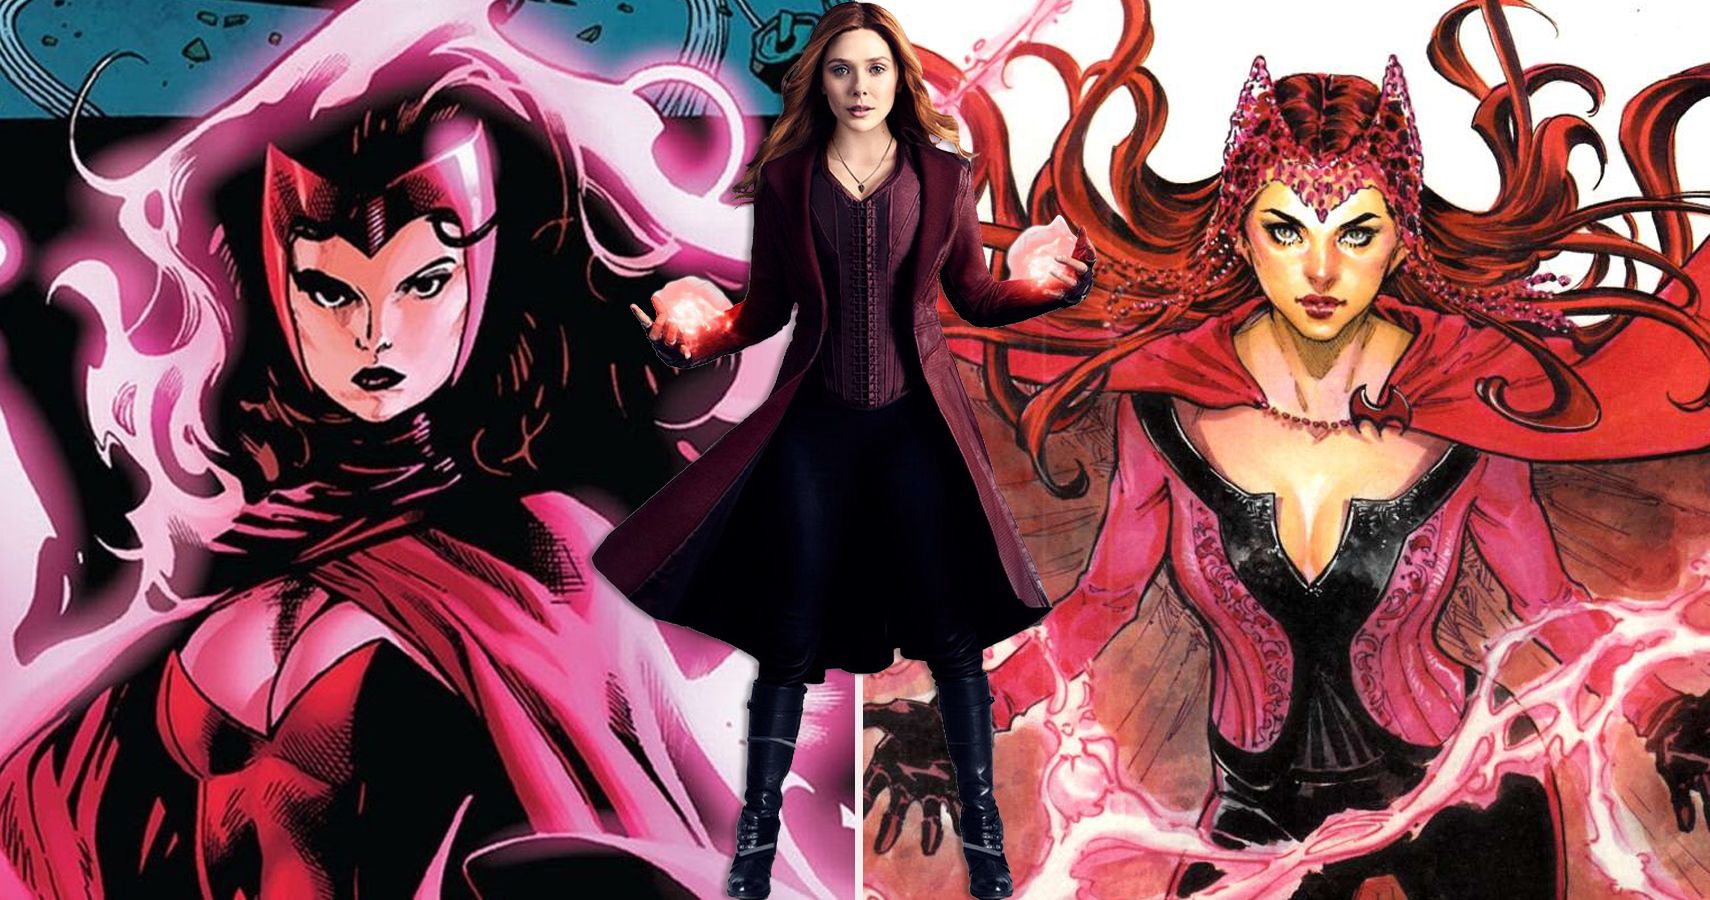 Exclusive Preview: SCARLET WITCH #4  Scarlet witch, Scarlet witch marvel,  Marvel comics art